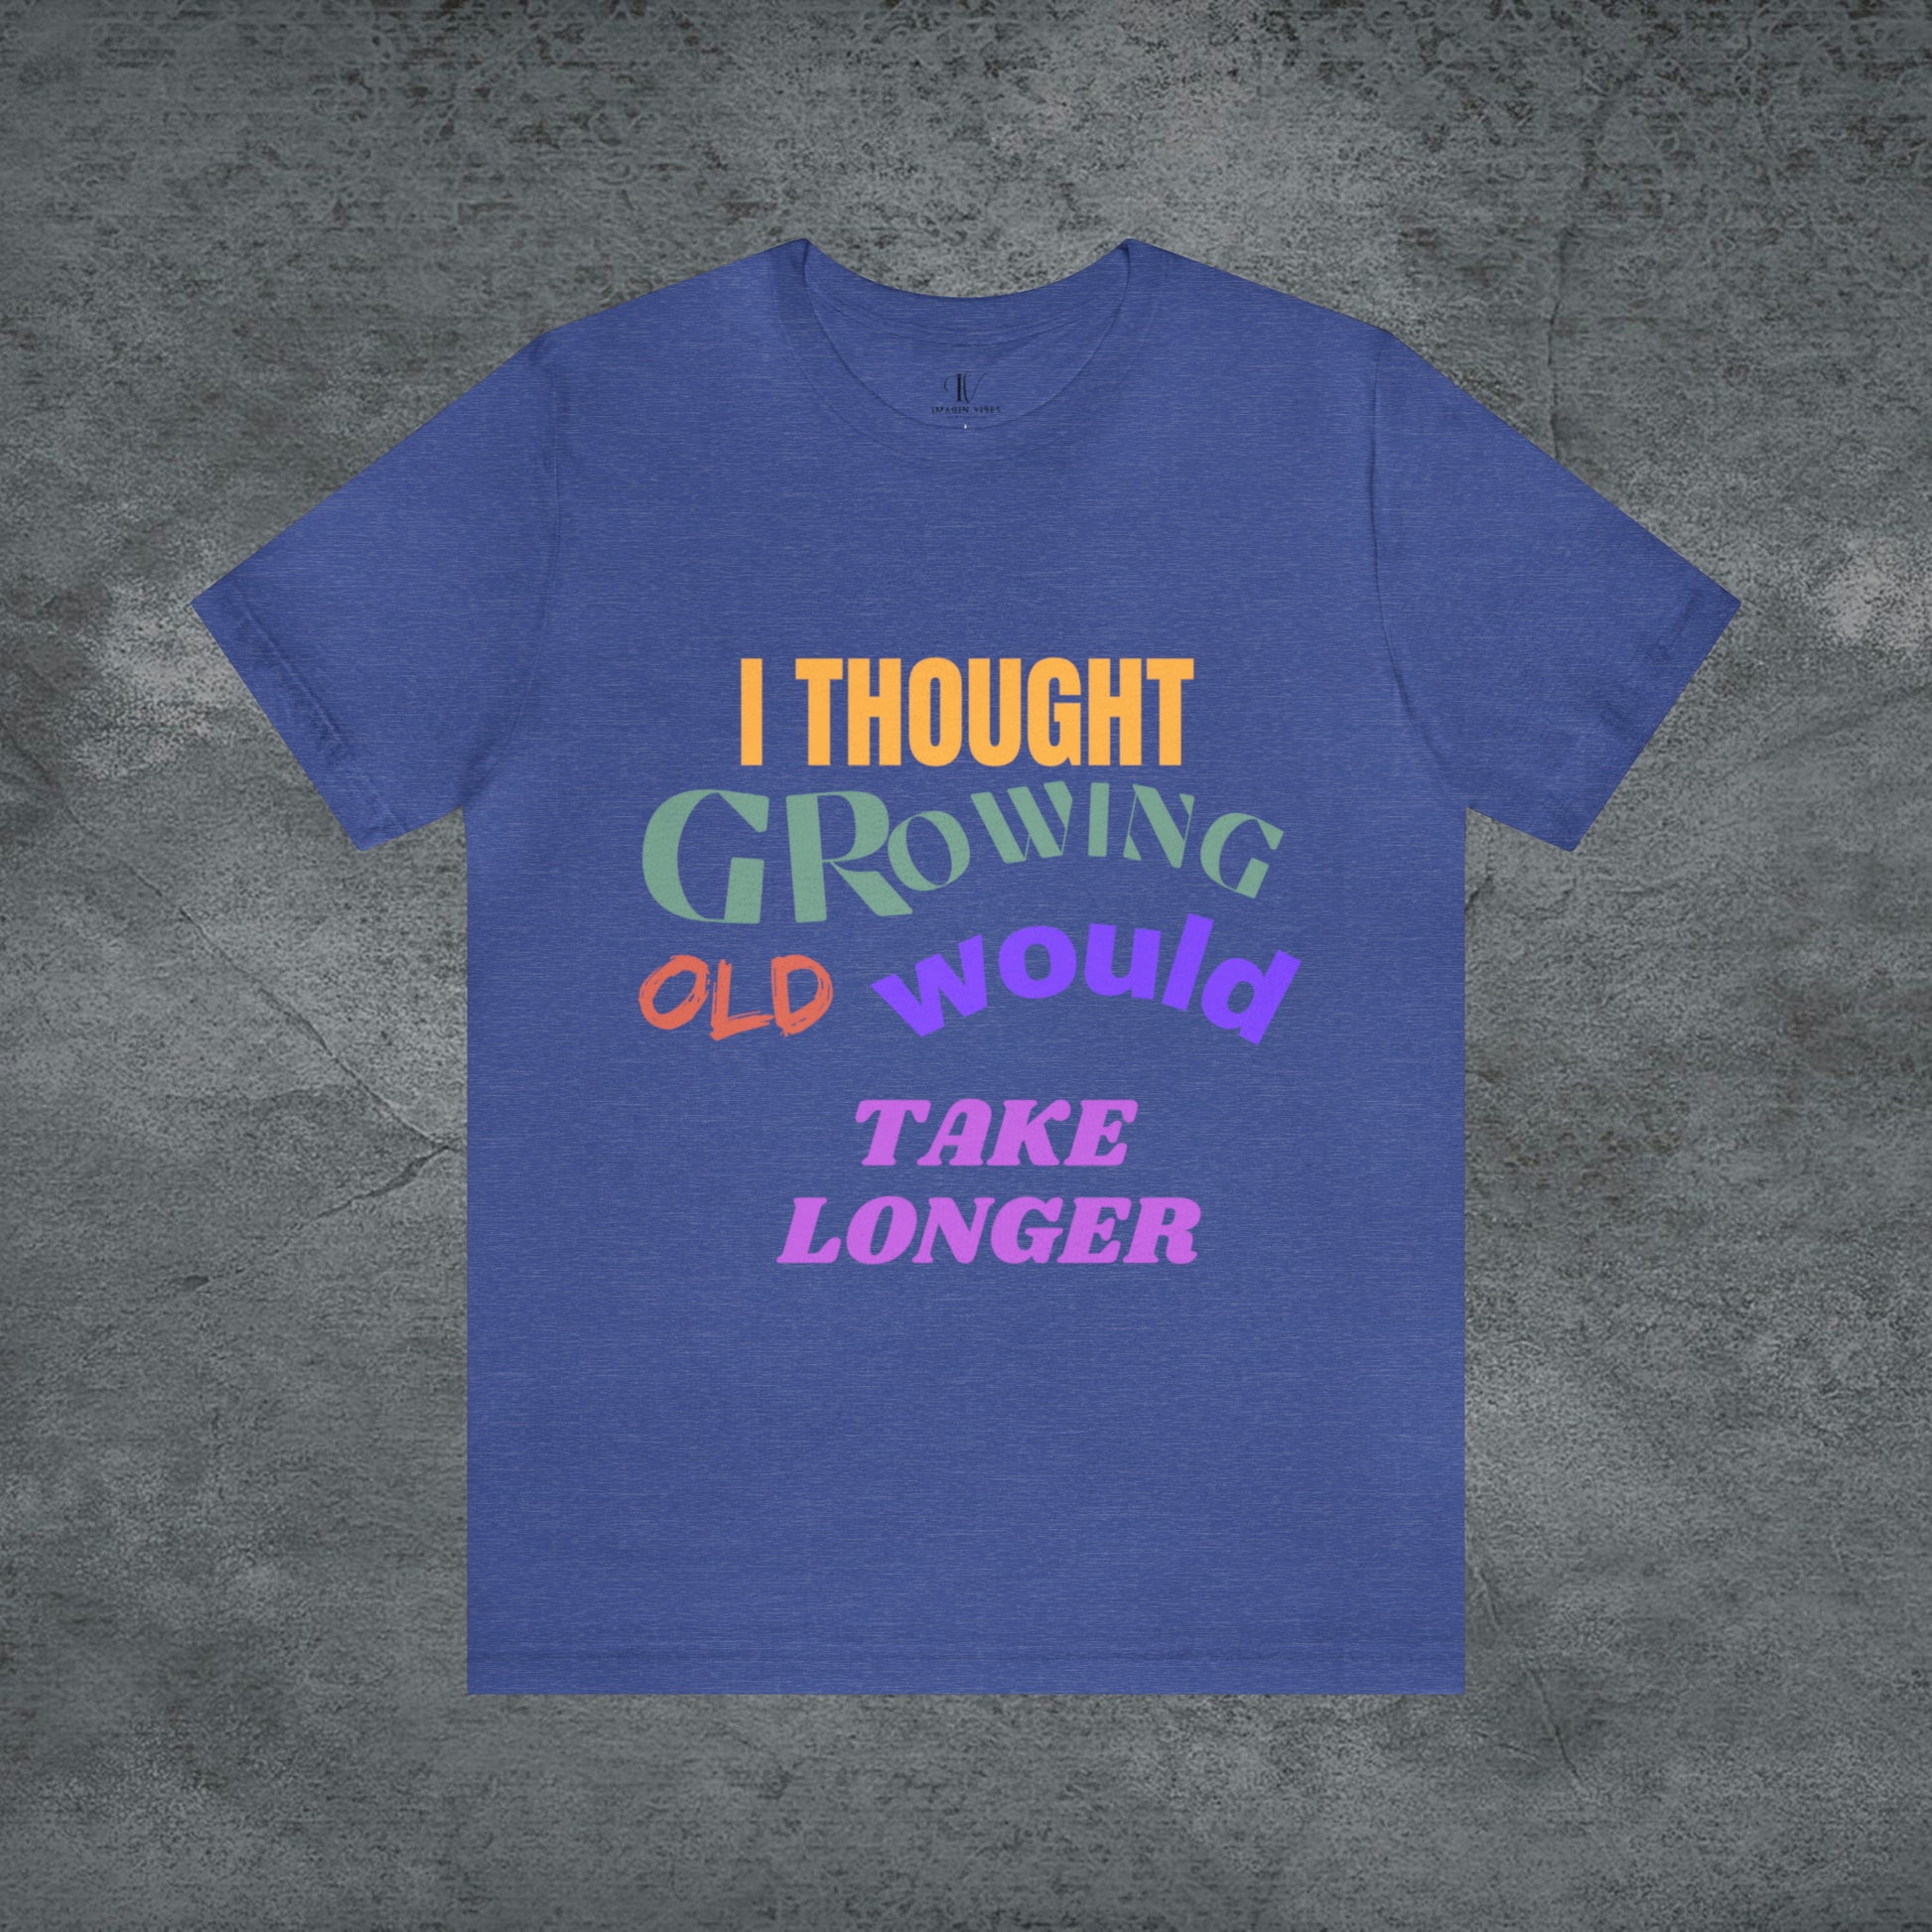 I Thought Growing Old Would Take Longer T-Shirt - Getting Older T-Shirt - Funny Adulting Tee - Old Age T-Shirt - Old Person T-Shirt T-Shirt Heather True Royal S 